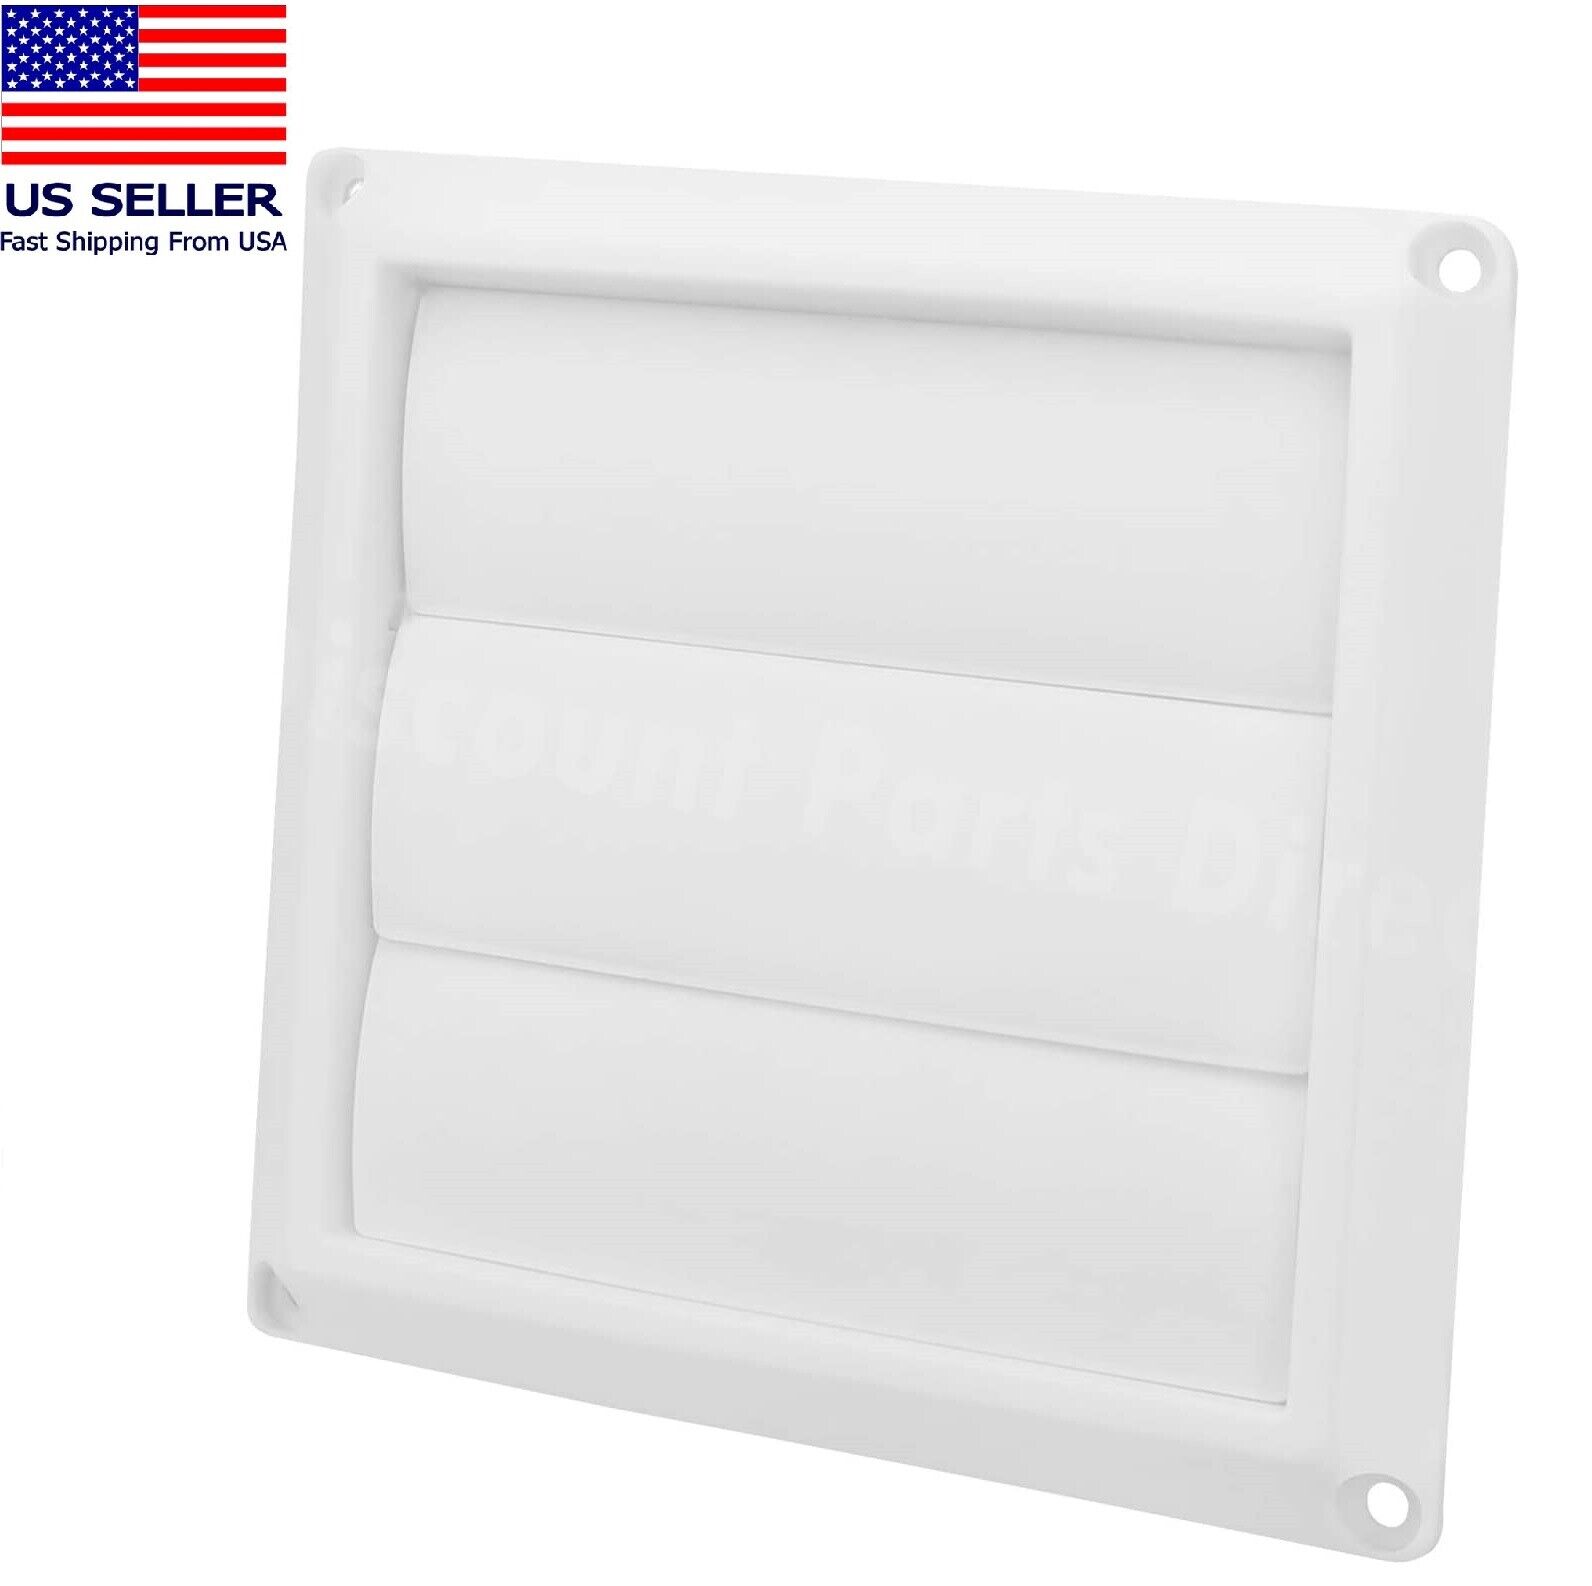 Dryer Air Vent Cover Cap 4'' Louvered Cover White Exterior Wall Vent Hood Outlet